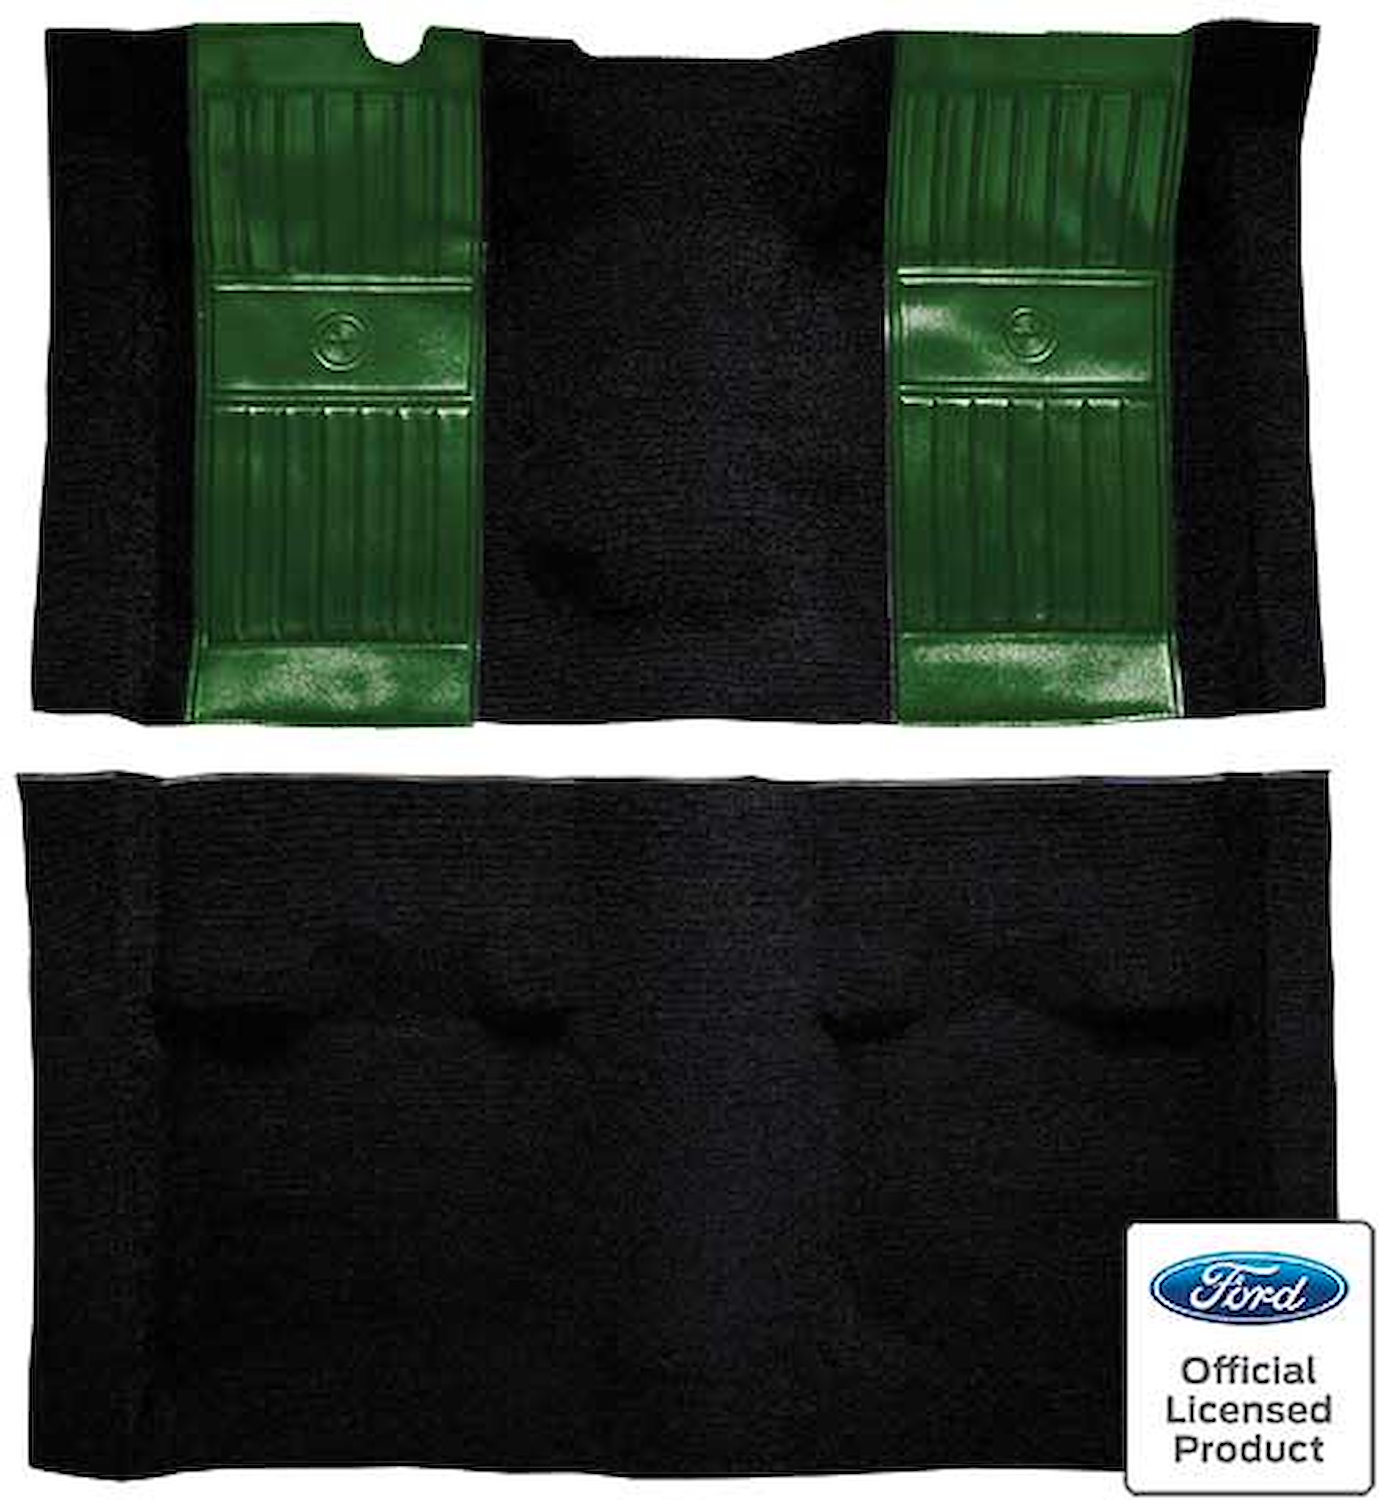 A4117B39 Nylon Loop Floor Carpet With Mass Backing 1971-73 Mustang Mach 1; Black/Green Pony Inserts